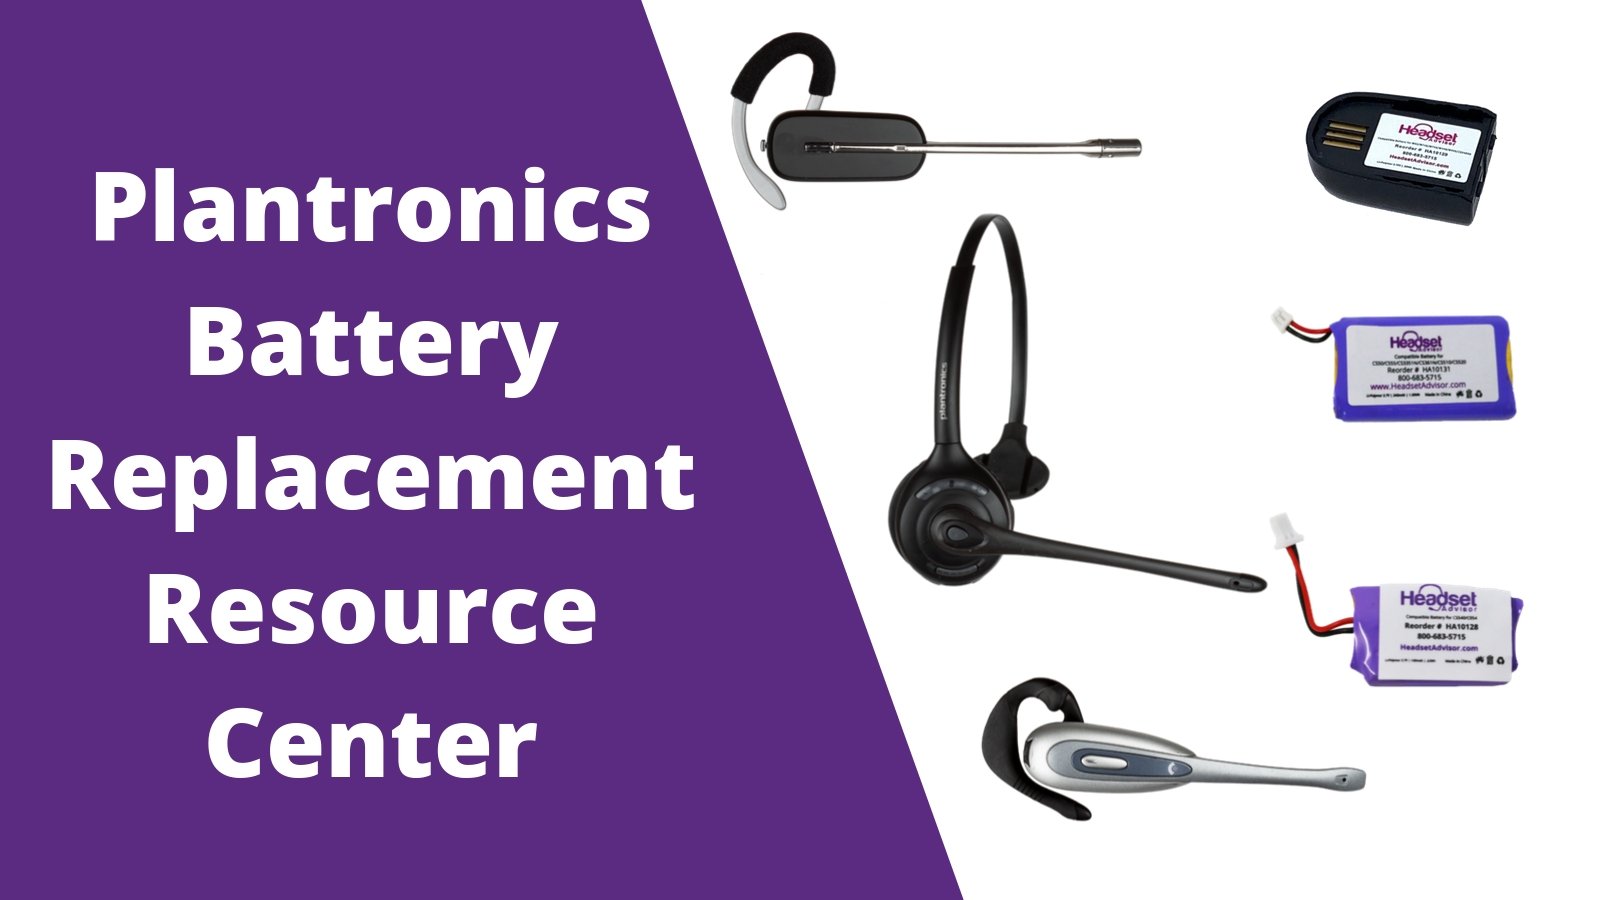 Plantronics Headset Battery Replacement Guide Resource Center - Headset Advisor